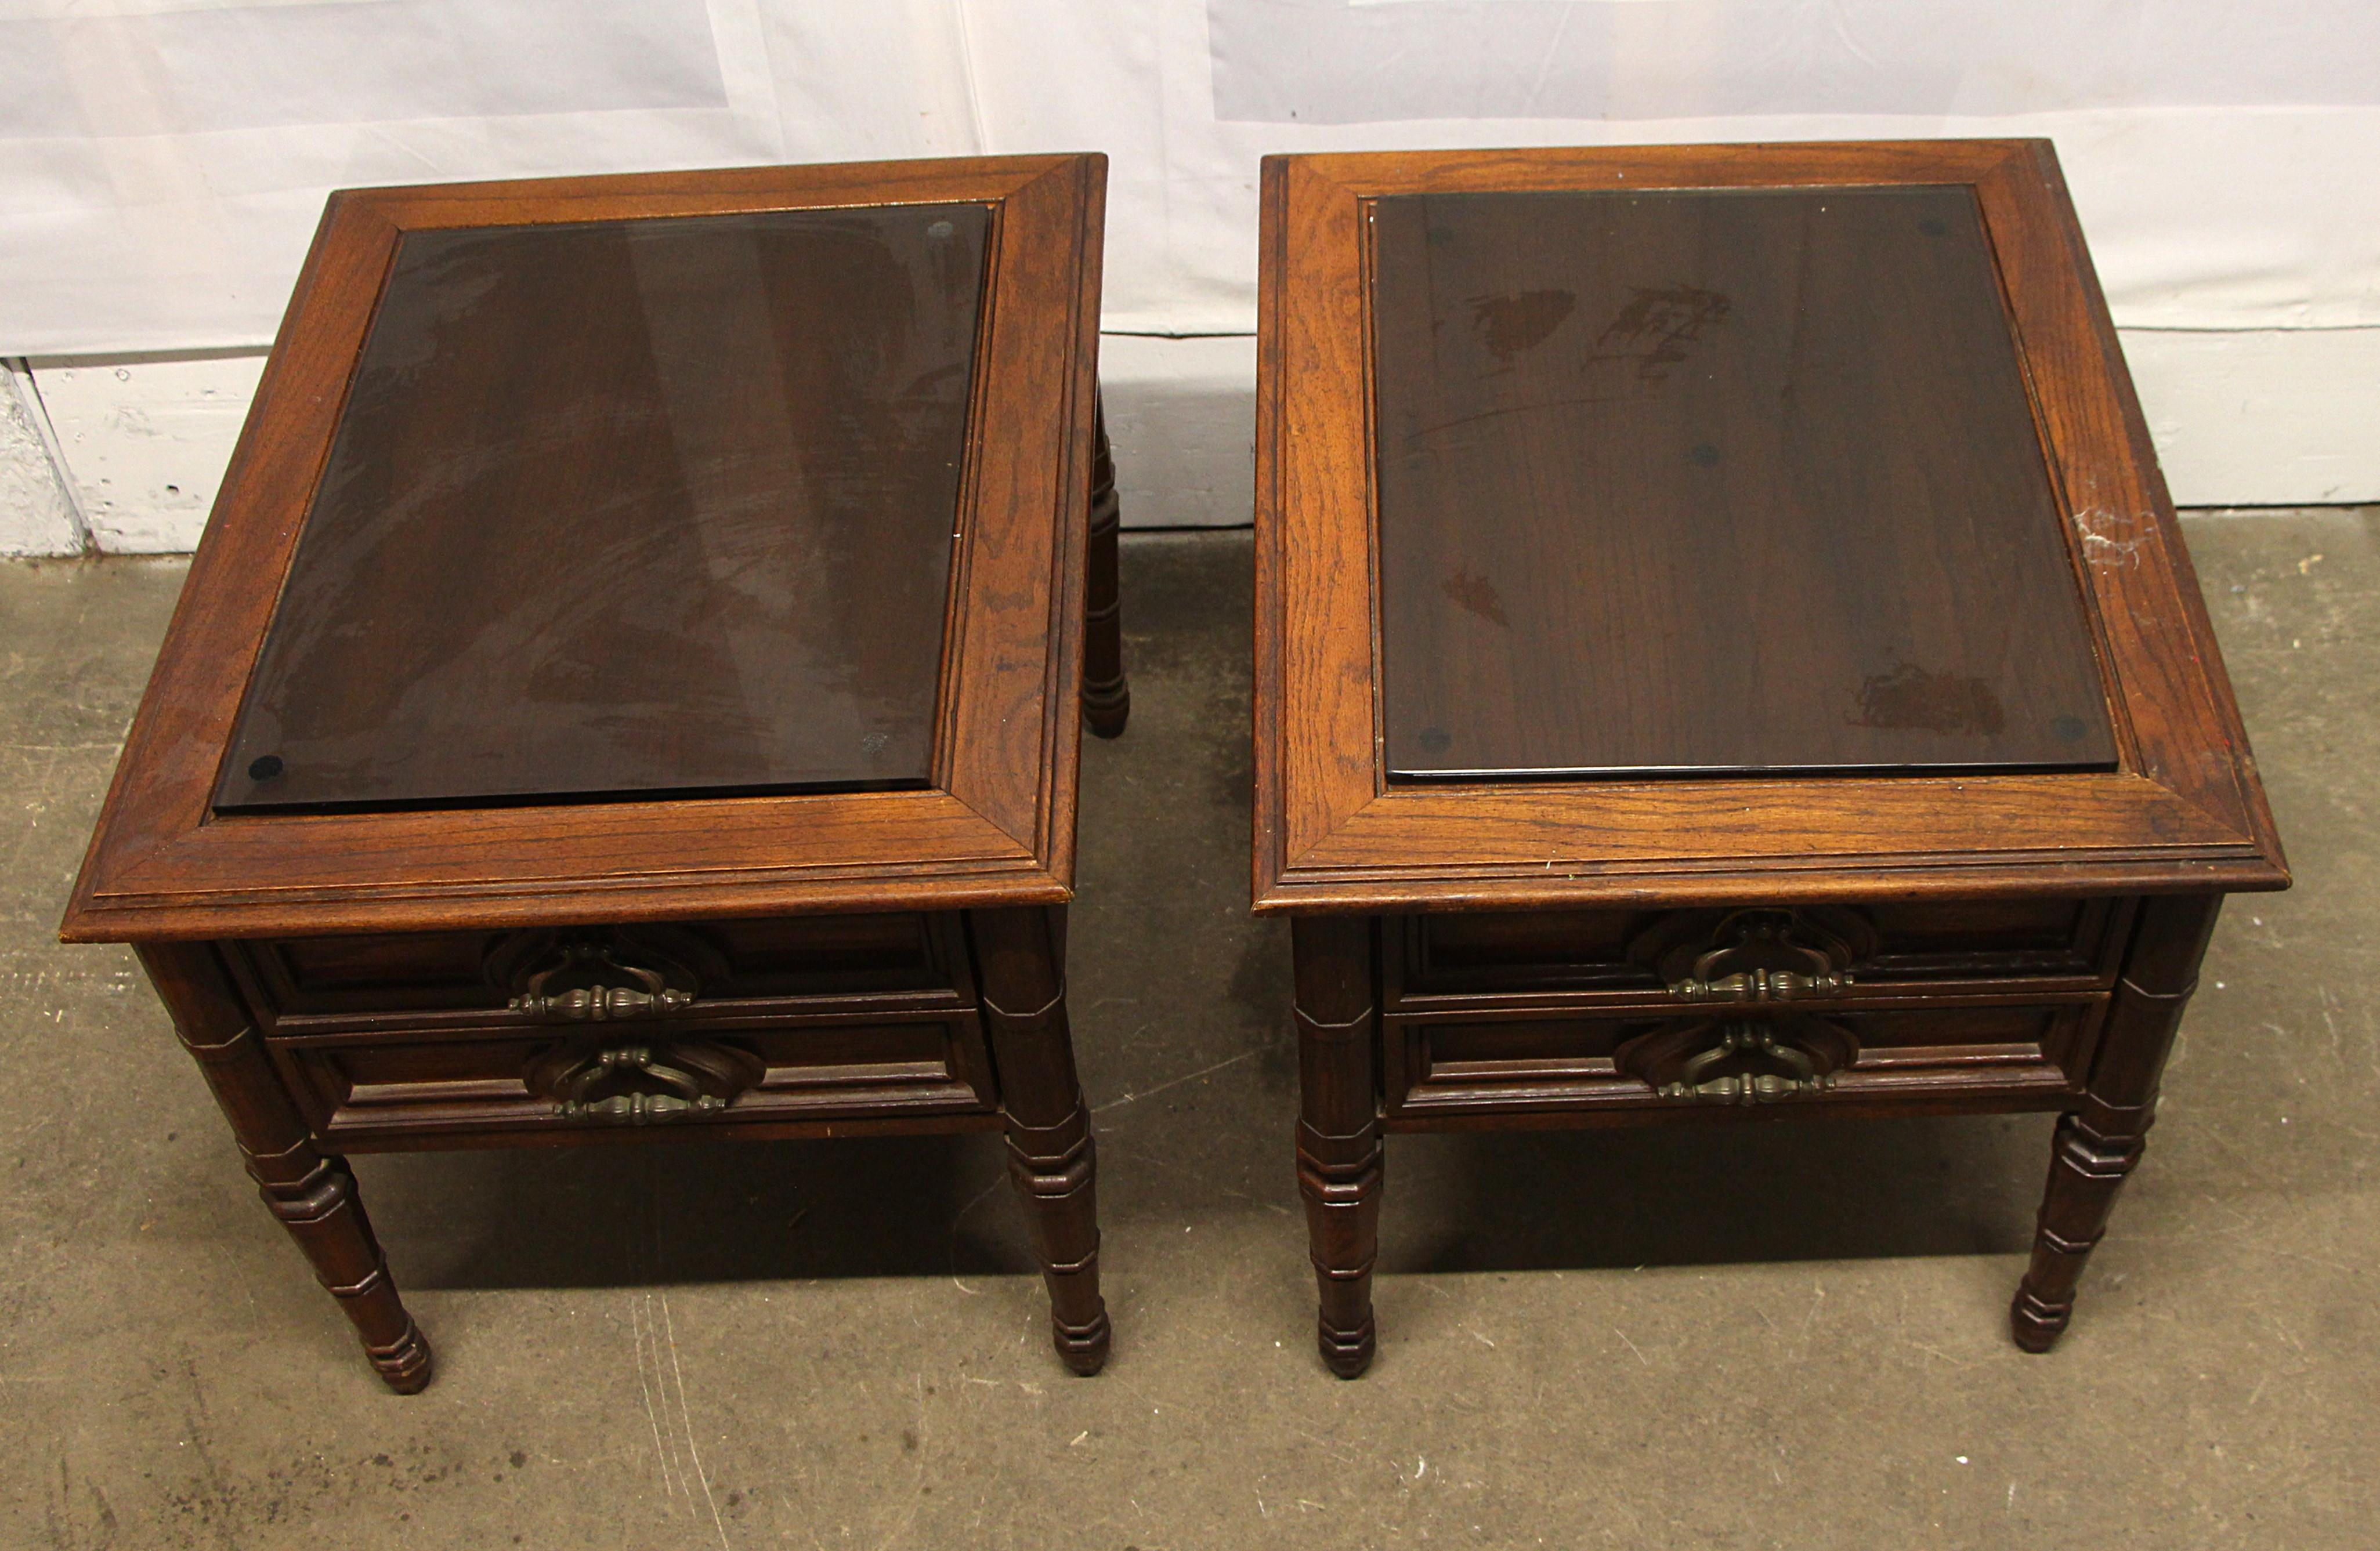 1970s dark tone carved oak single drawer side tables with double drawer pulls and glass tops. Priced as a pair. This can be seen at our 302 Bowery location in NoHo in Manhattan.